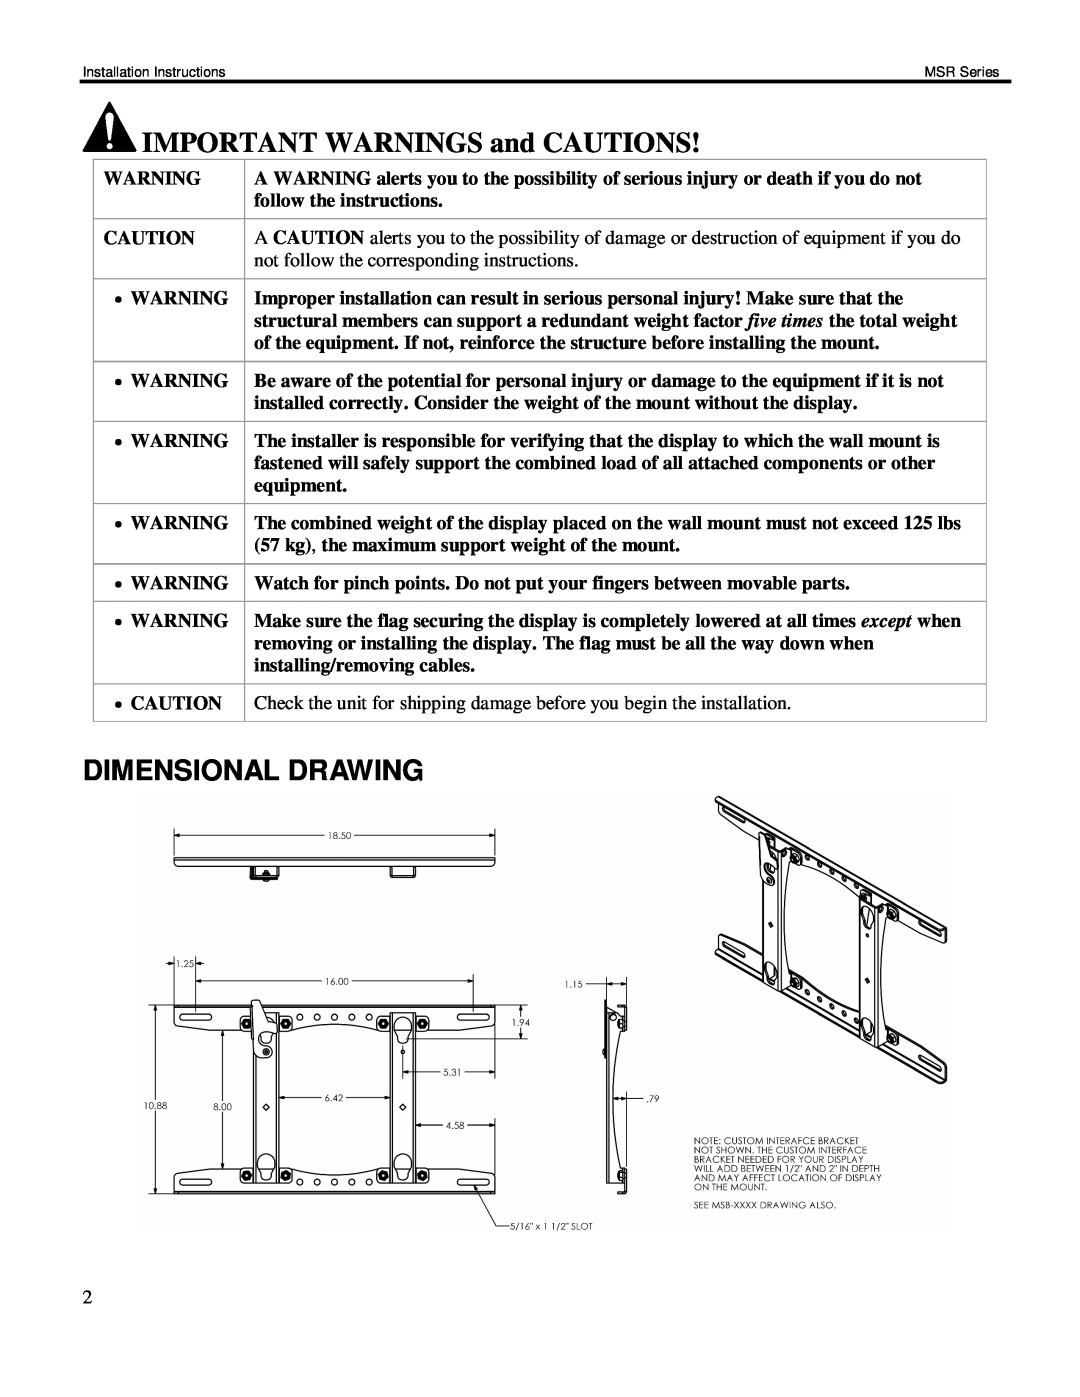 Chief Manufacturing MSR Series installation instructions Dimensional Drawing, IMPORTANT WARNINGS and CAUTIONS 